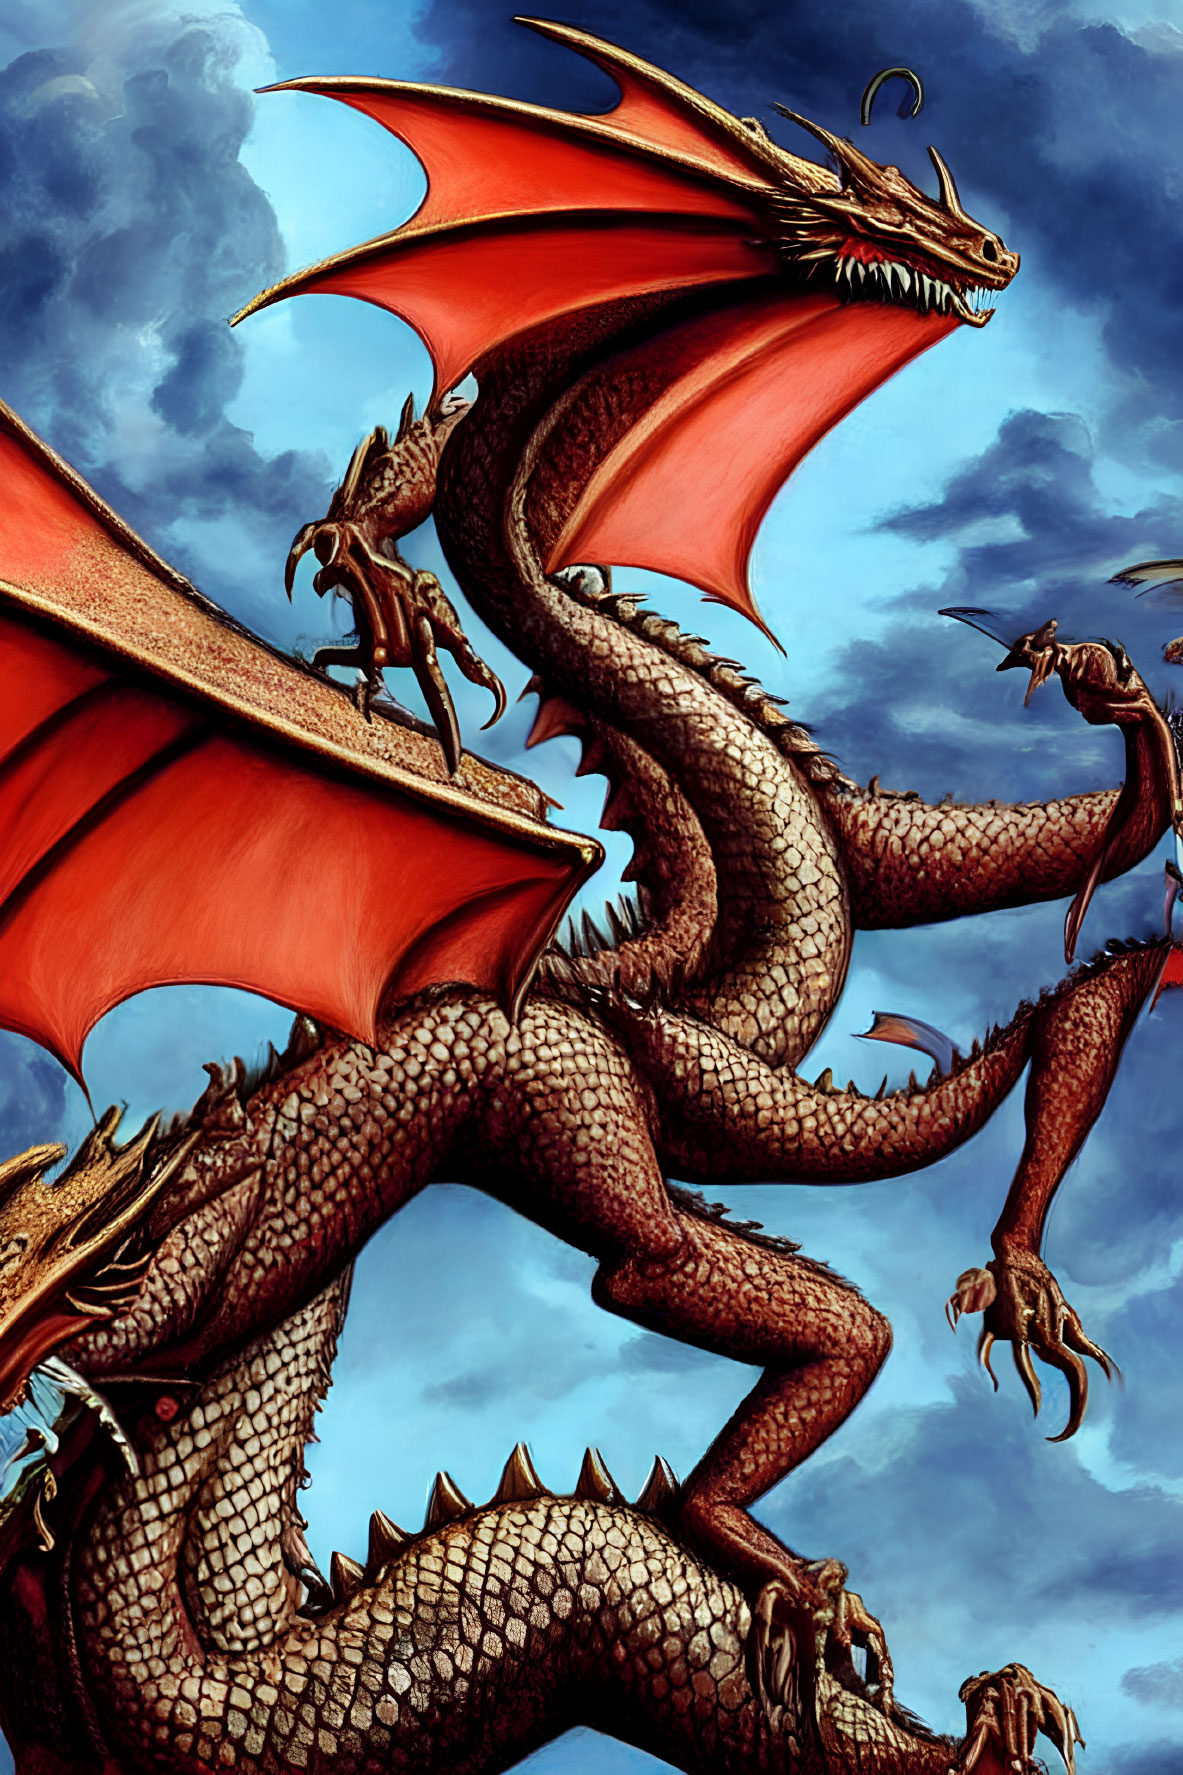 Red-winged dragon soaring amidst stormy blue clouds